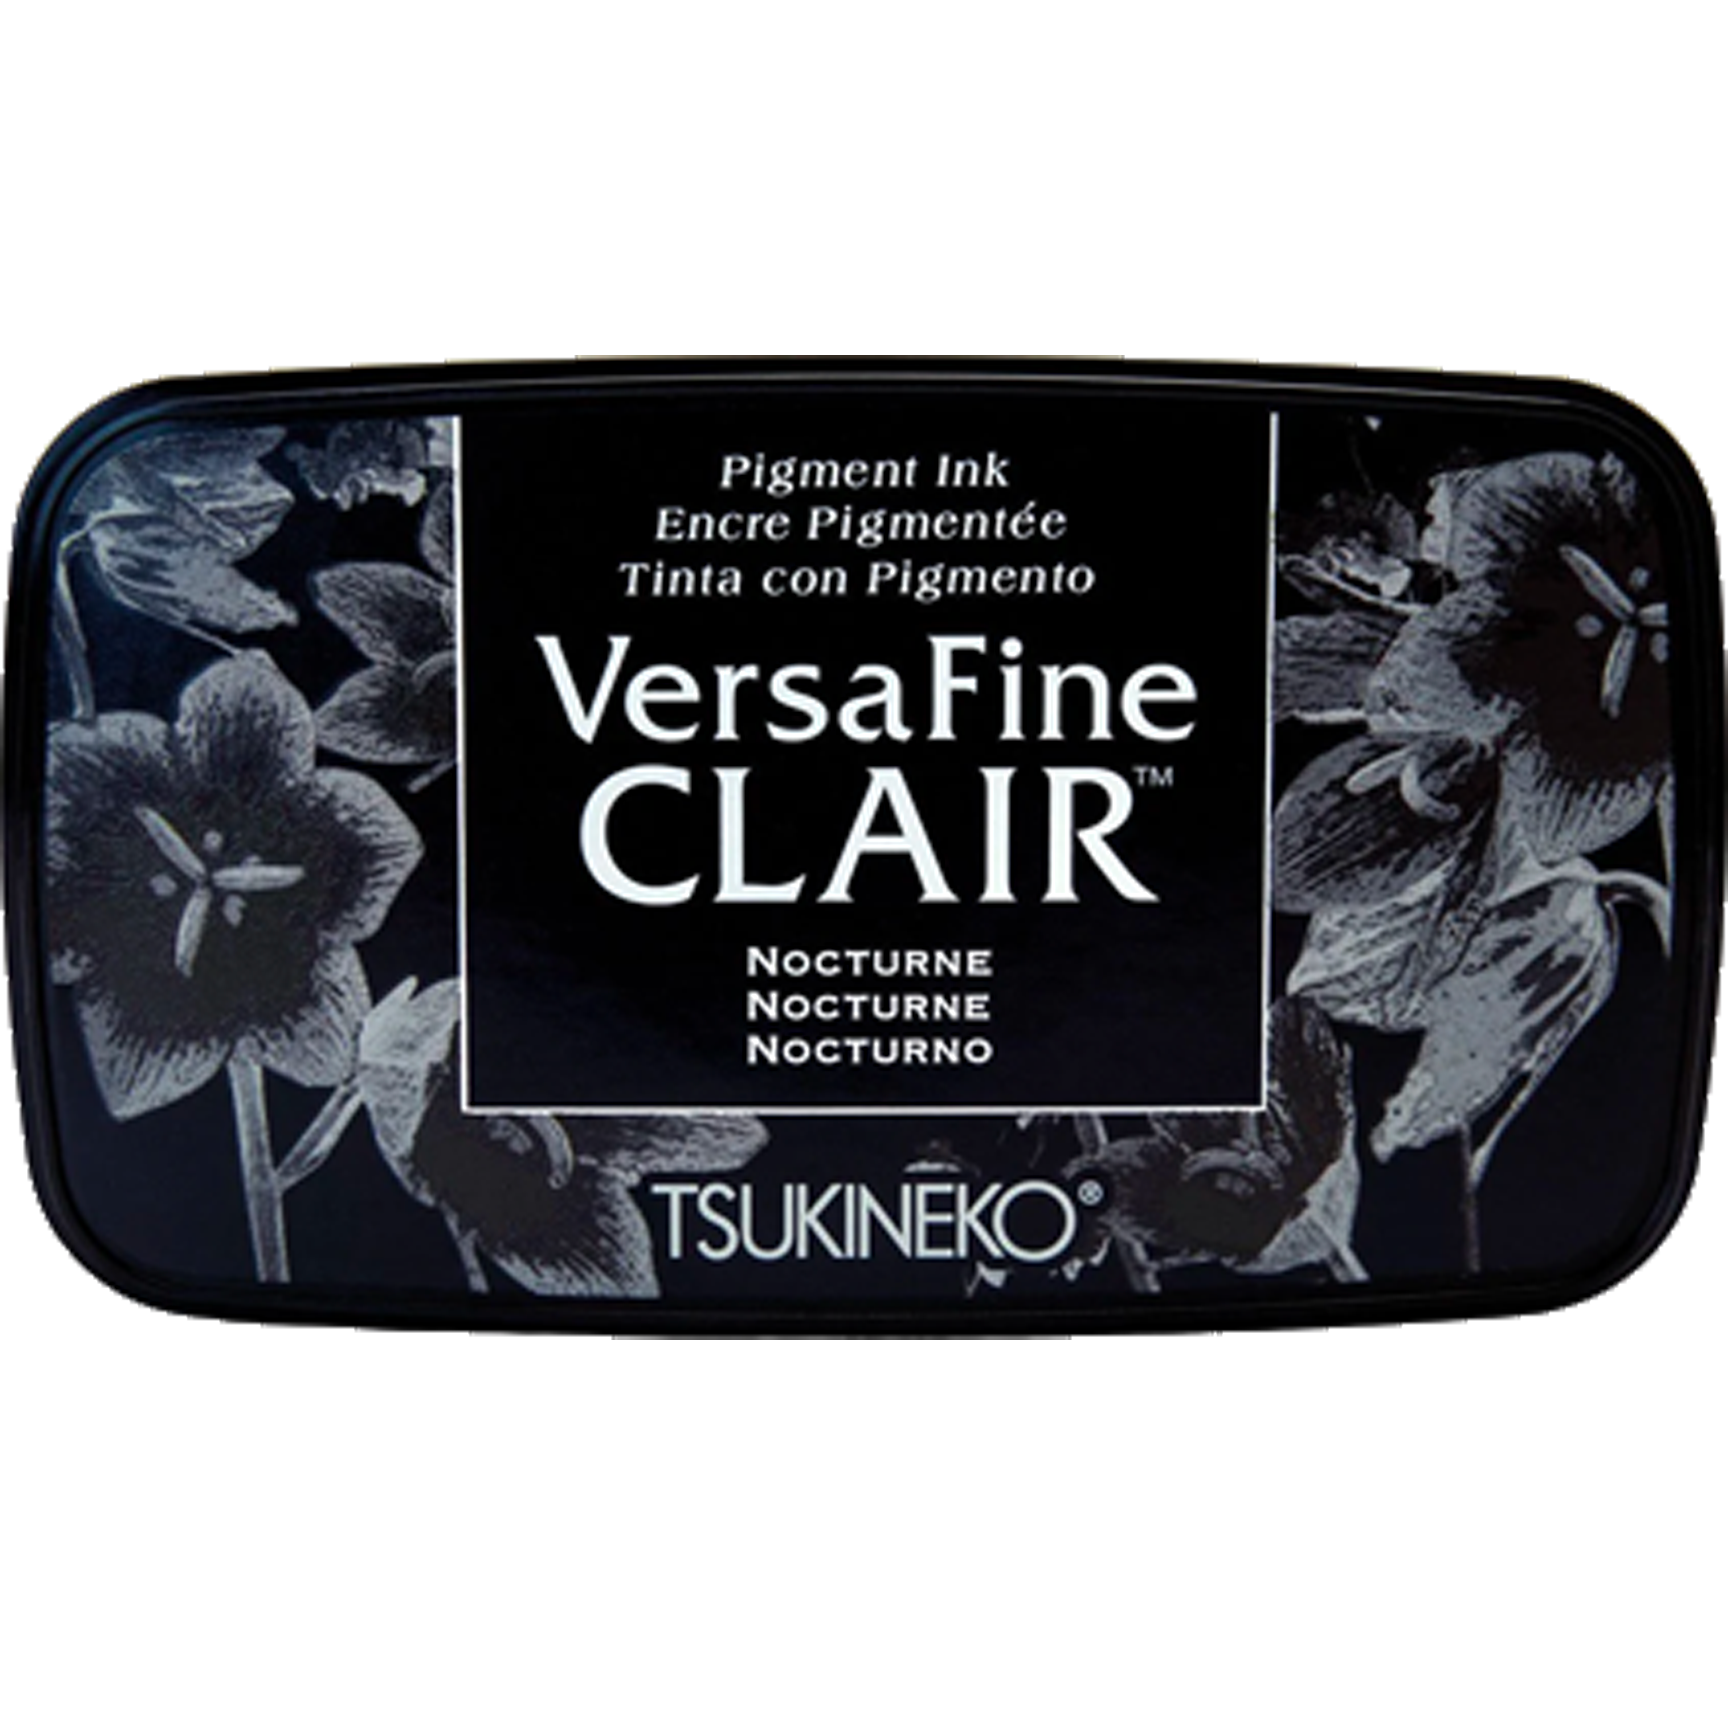 VersaFine Clair Ink Pad - your color choice!! - Tsukineko Pigment Pads New